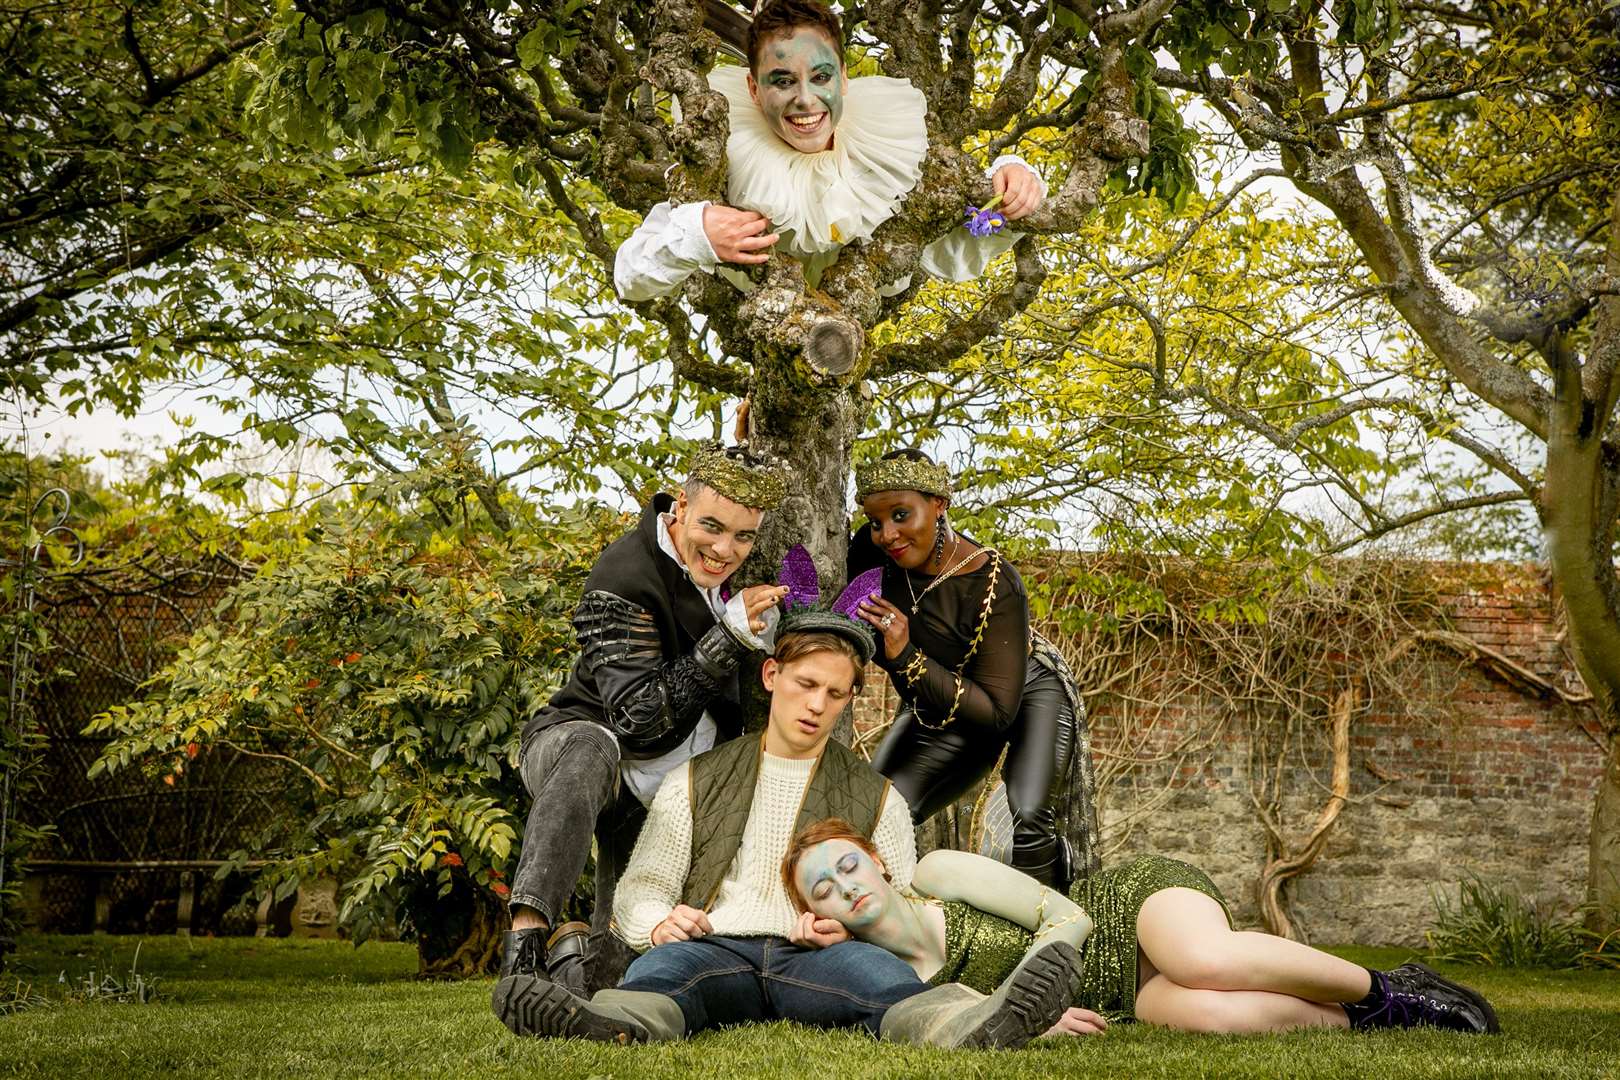 The Changeling Theatre presents A Midsummer Night's Dream at Walmer Castle